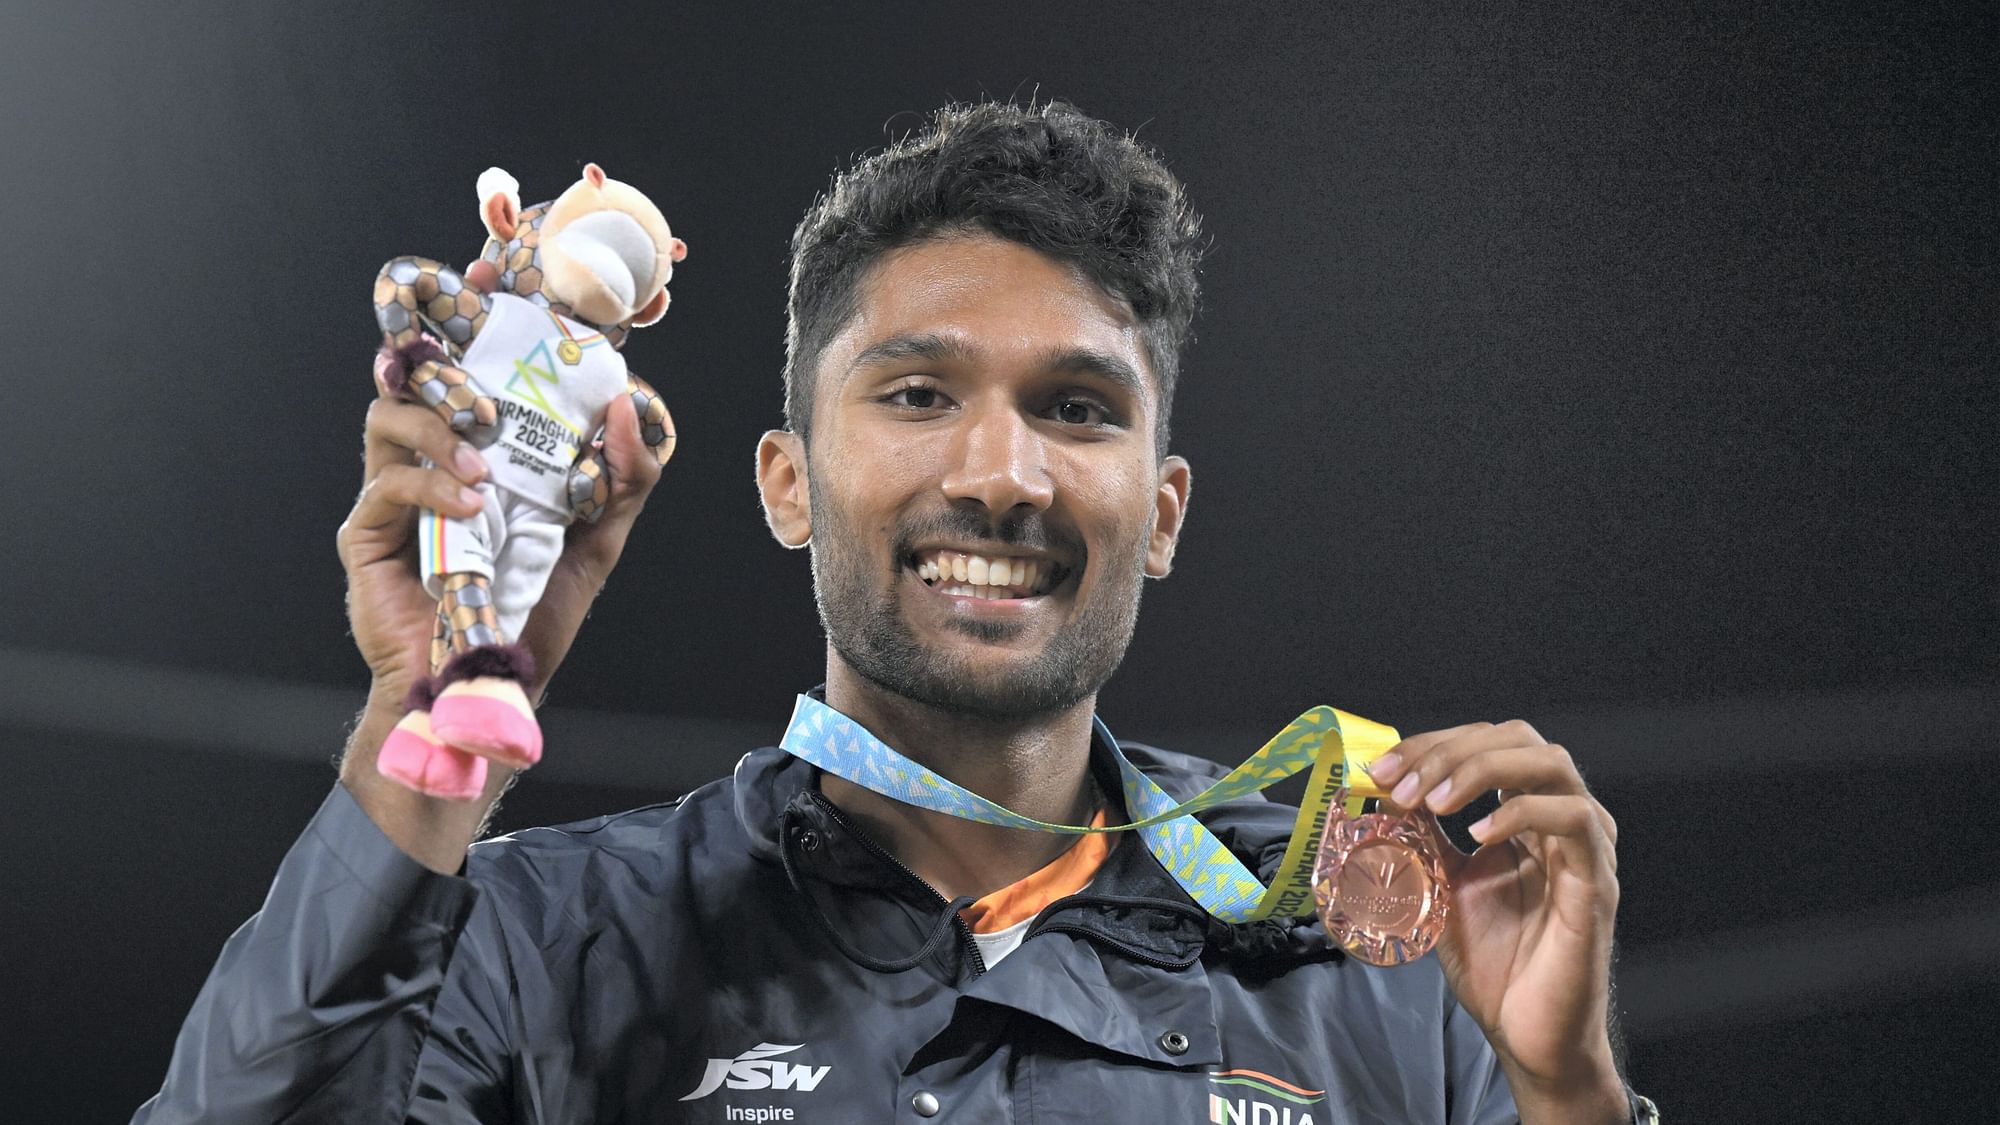 <div class="paragraphs"><p>India's Tejaswin Shankar celebrates after taking the bronze medal in the men's high jump at the 2022 Commonwealth Games in Birmingham.</p></div>